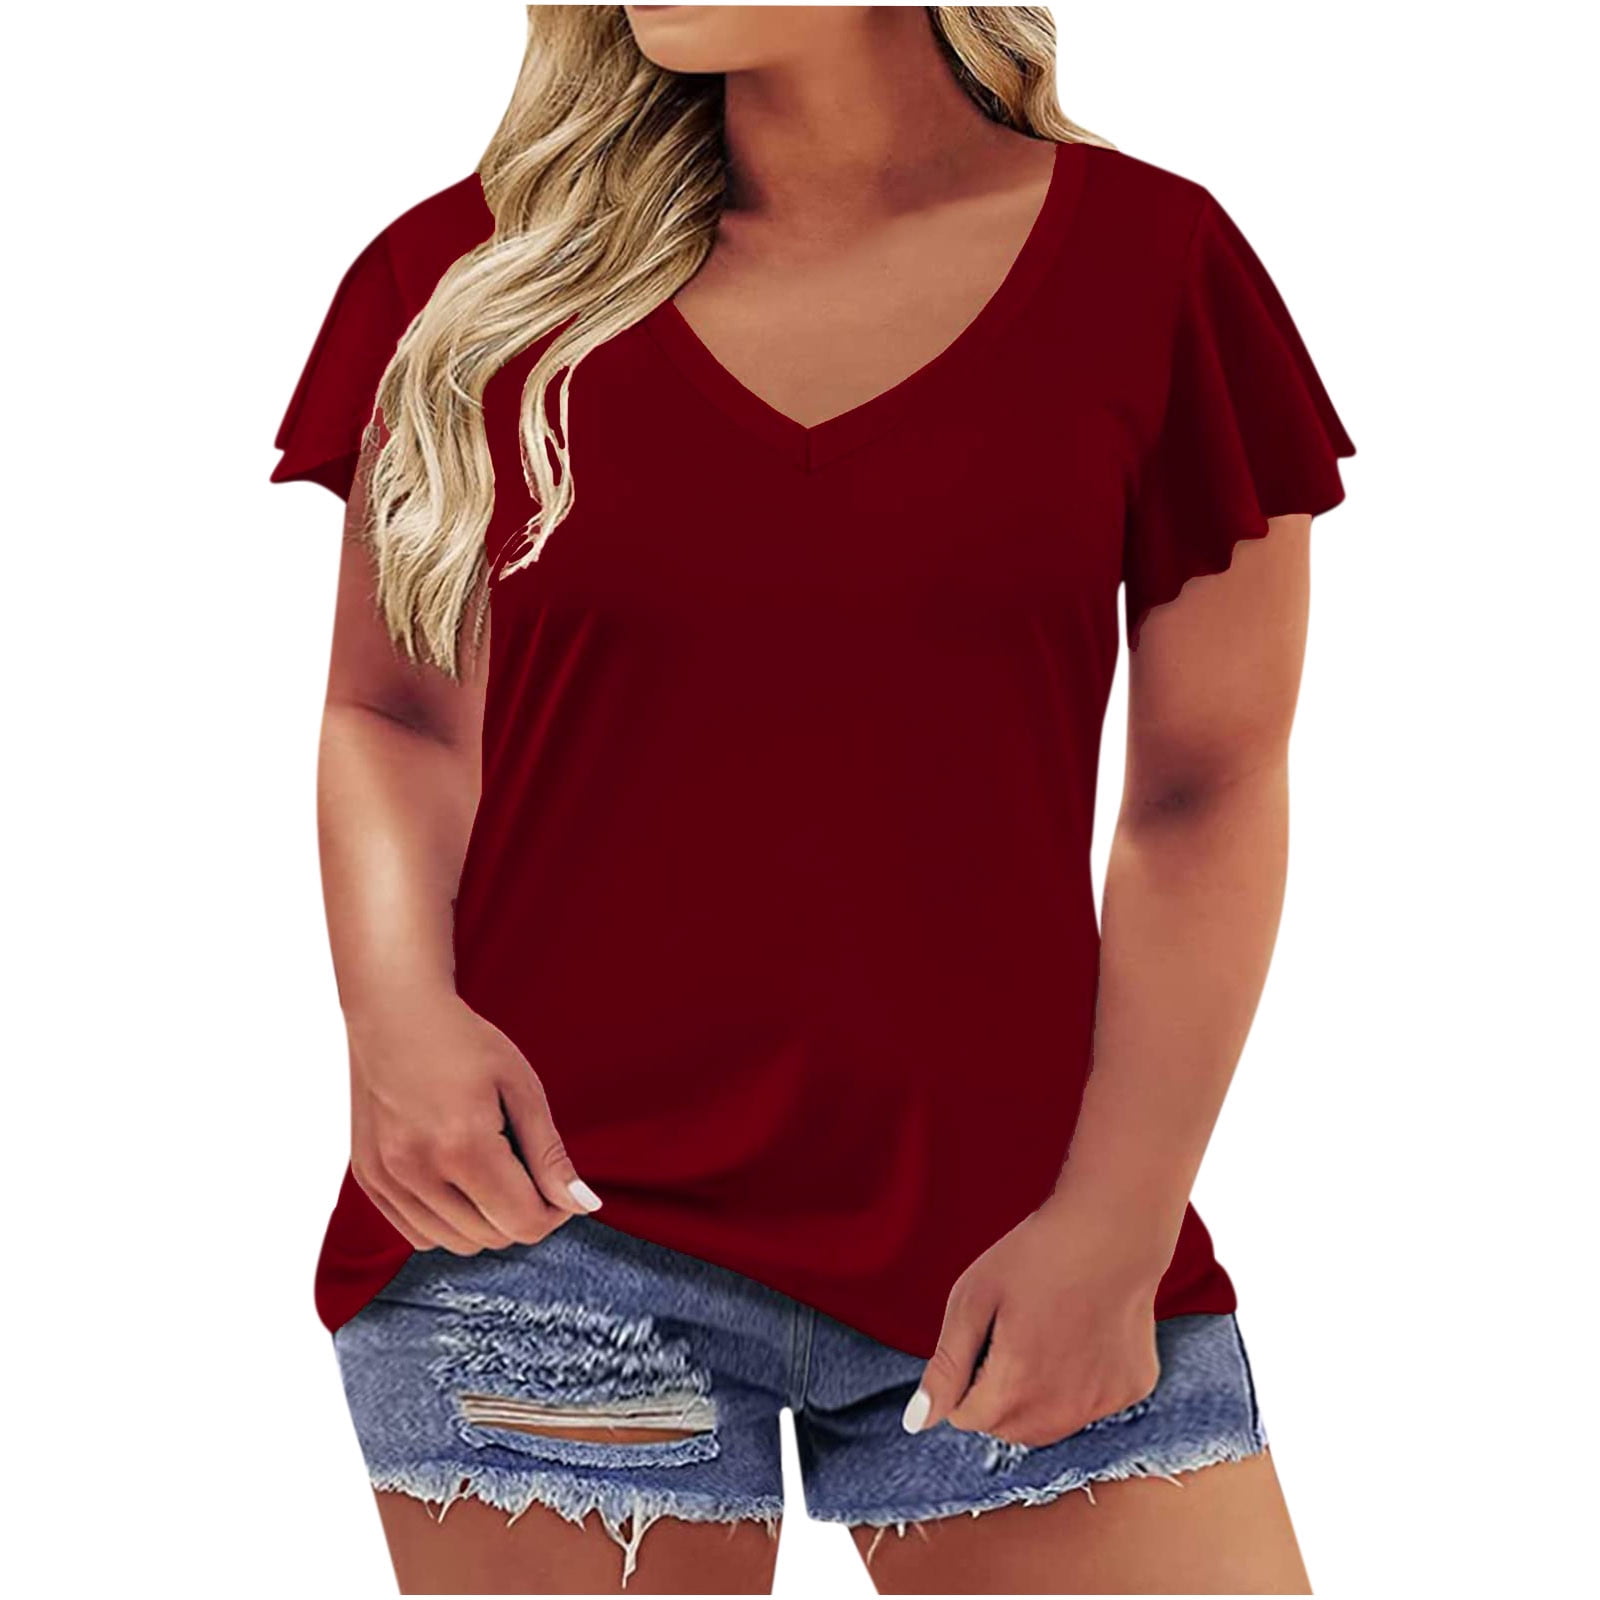 Essentials Women's Relaxed-Fit Short-Sleeve Scoopneck Swing